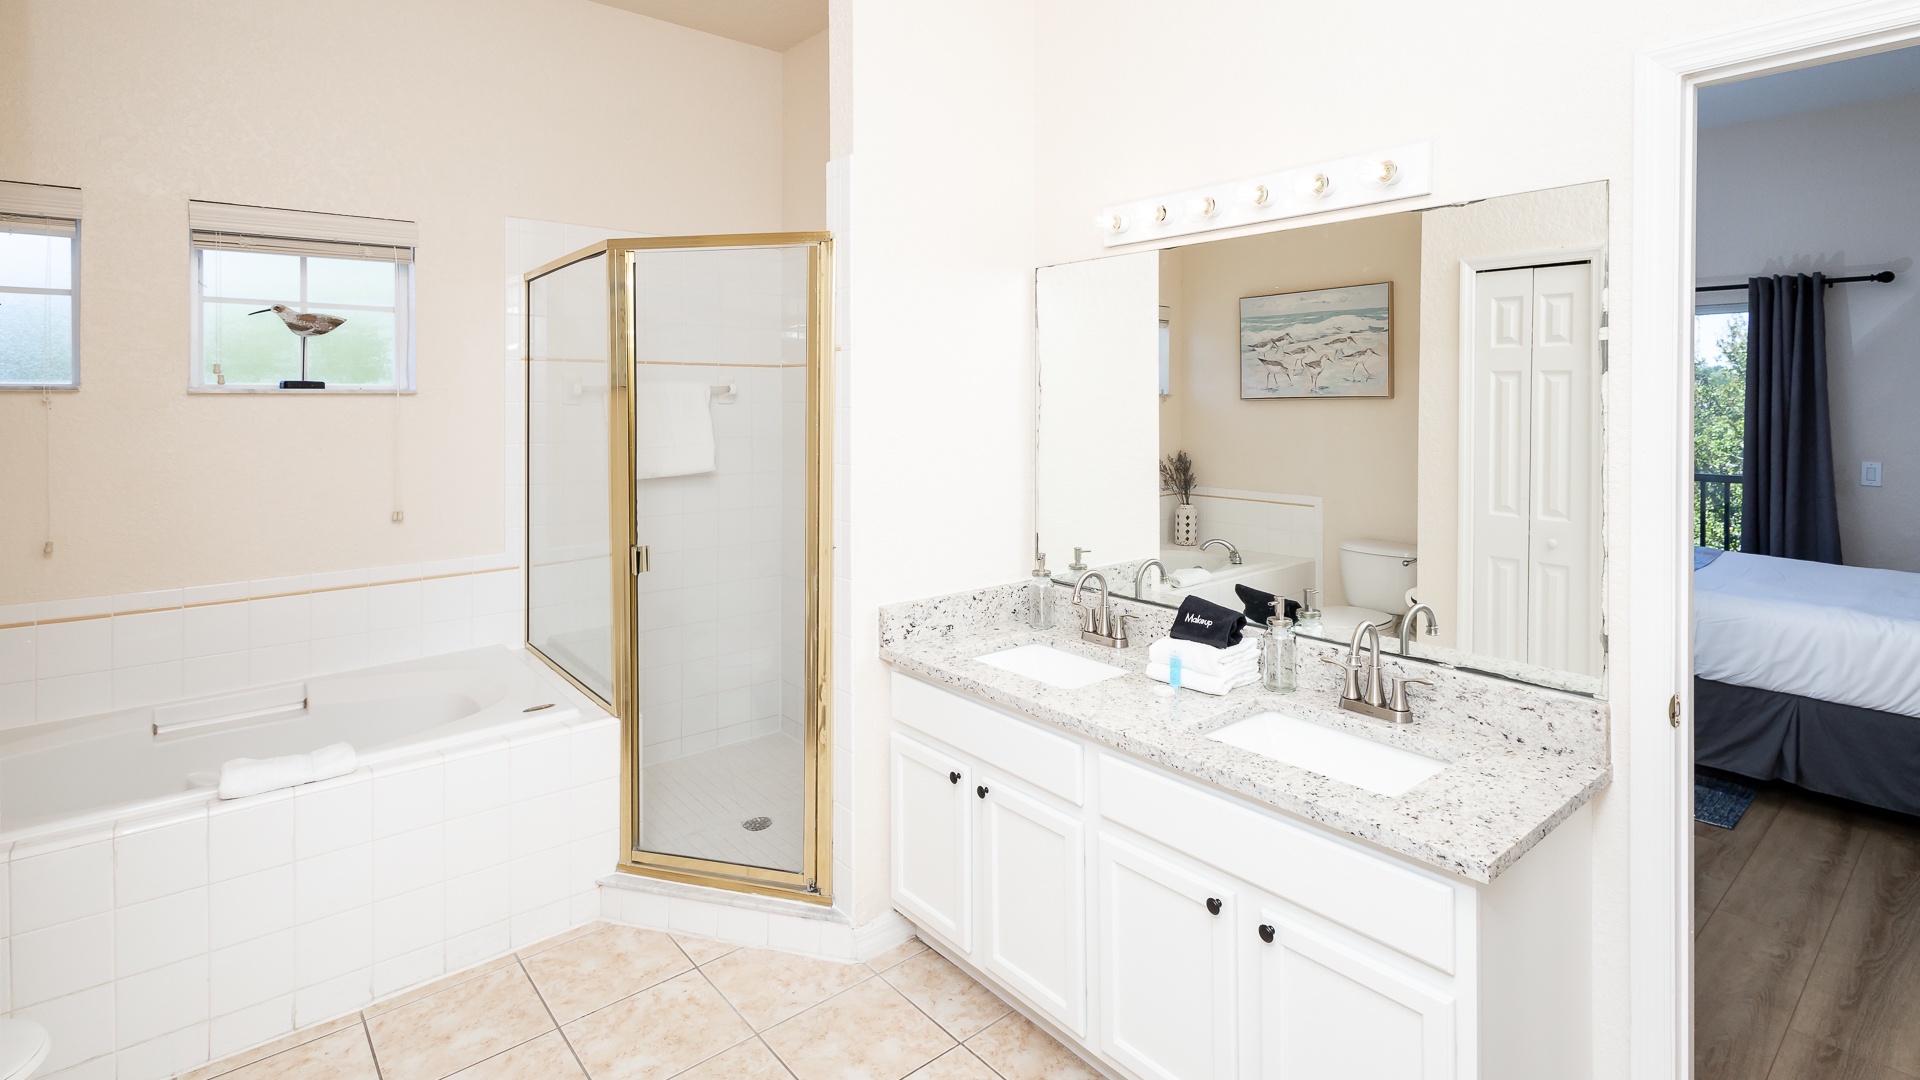 A double vanity, glass shower, & soaking tub await in the second full bath